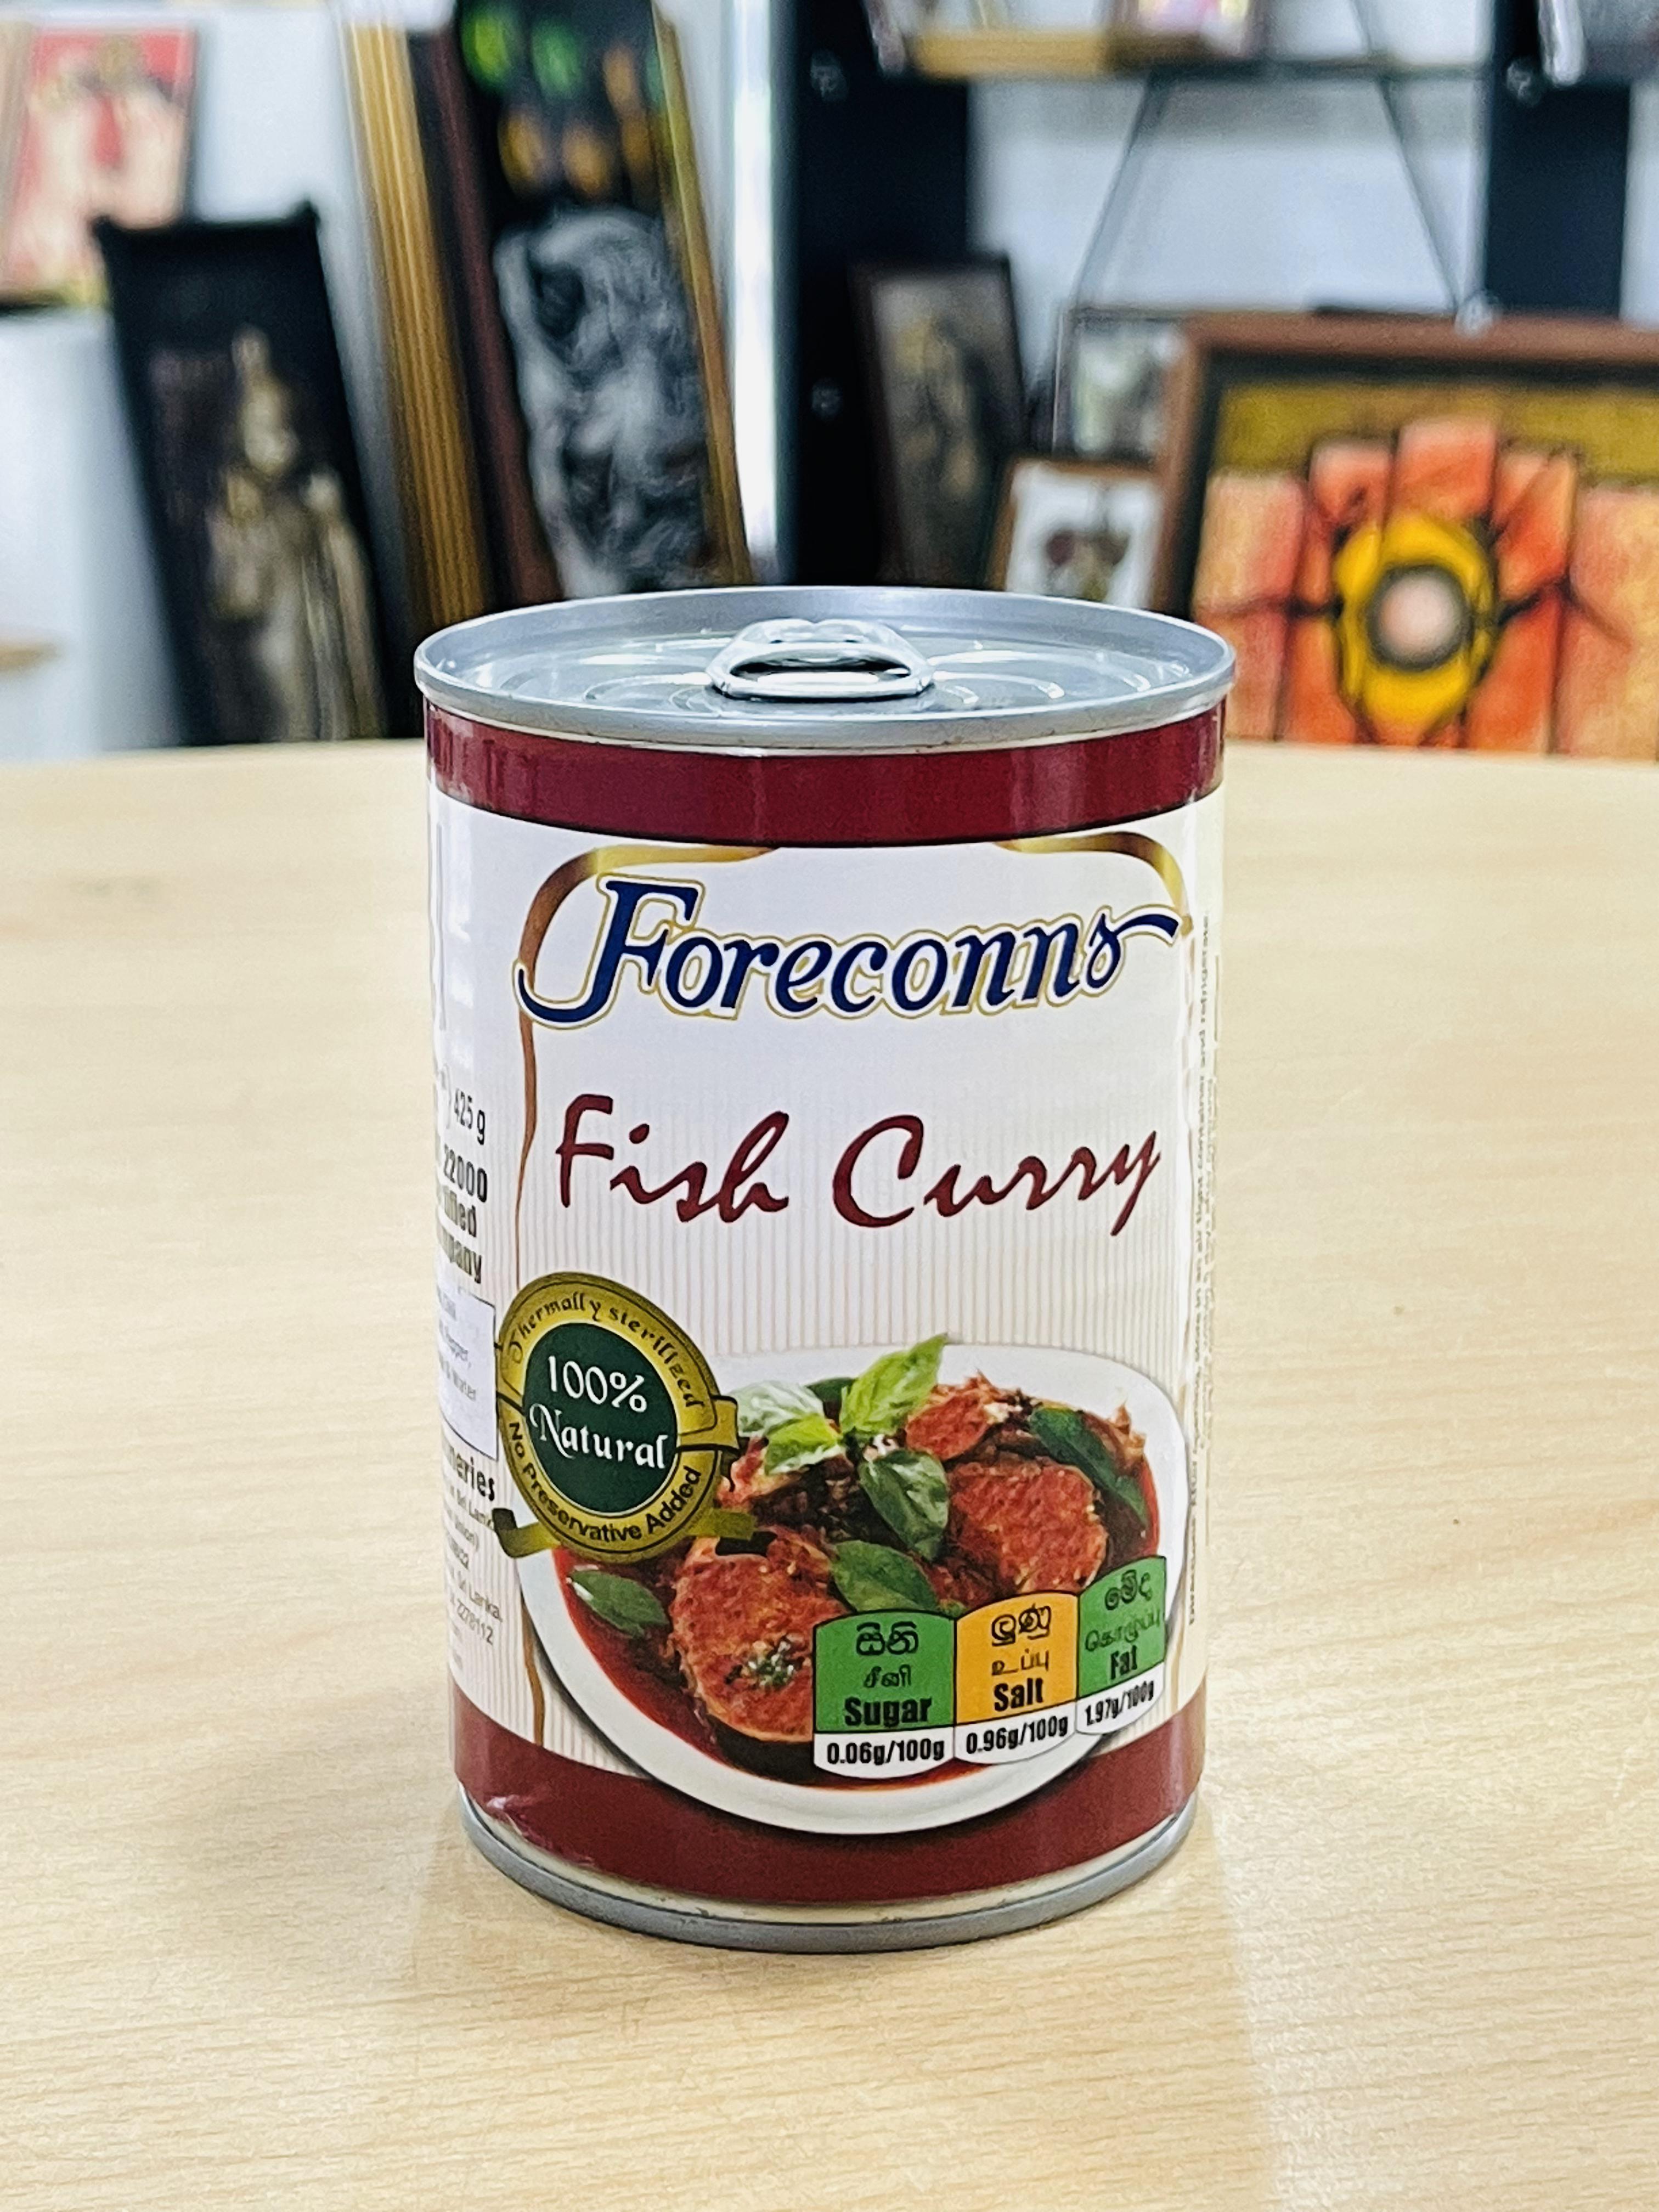 Foreconns Canned Fish Curry